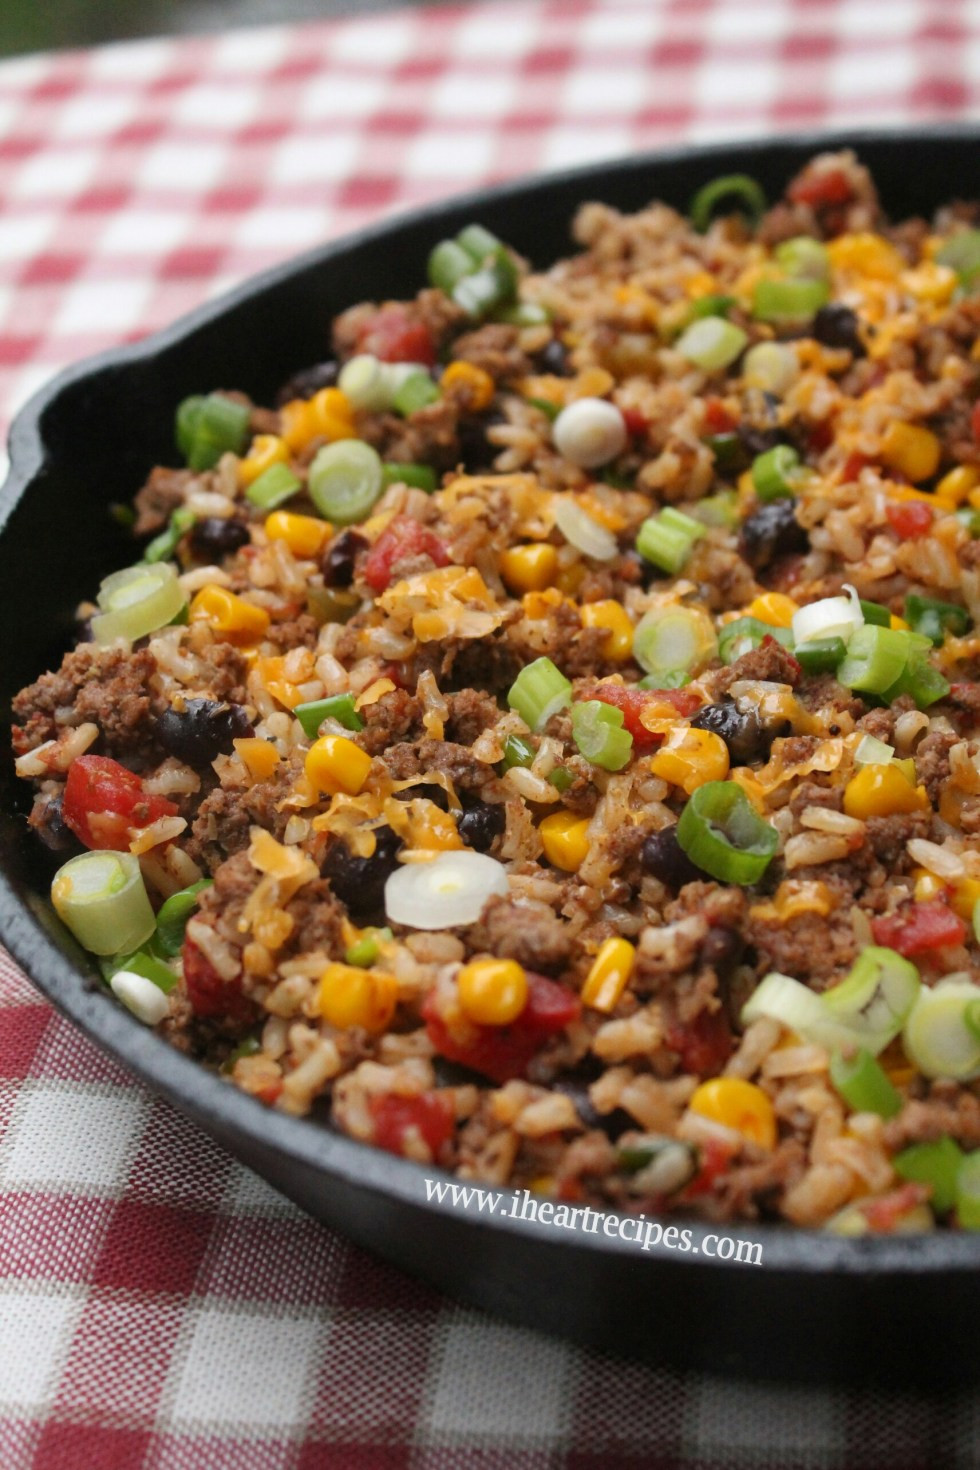 Recipes That Use Ground Beef
 Tex Mex Ground Beef Skillet